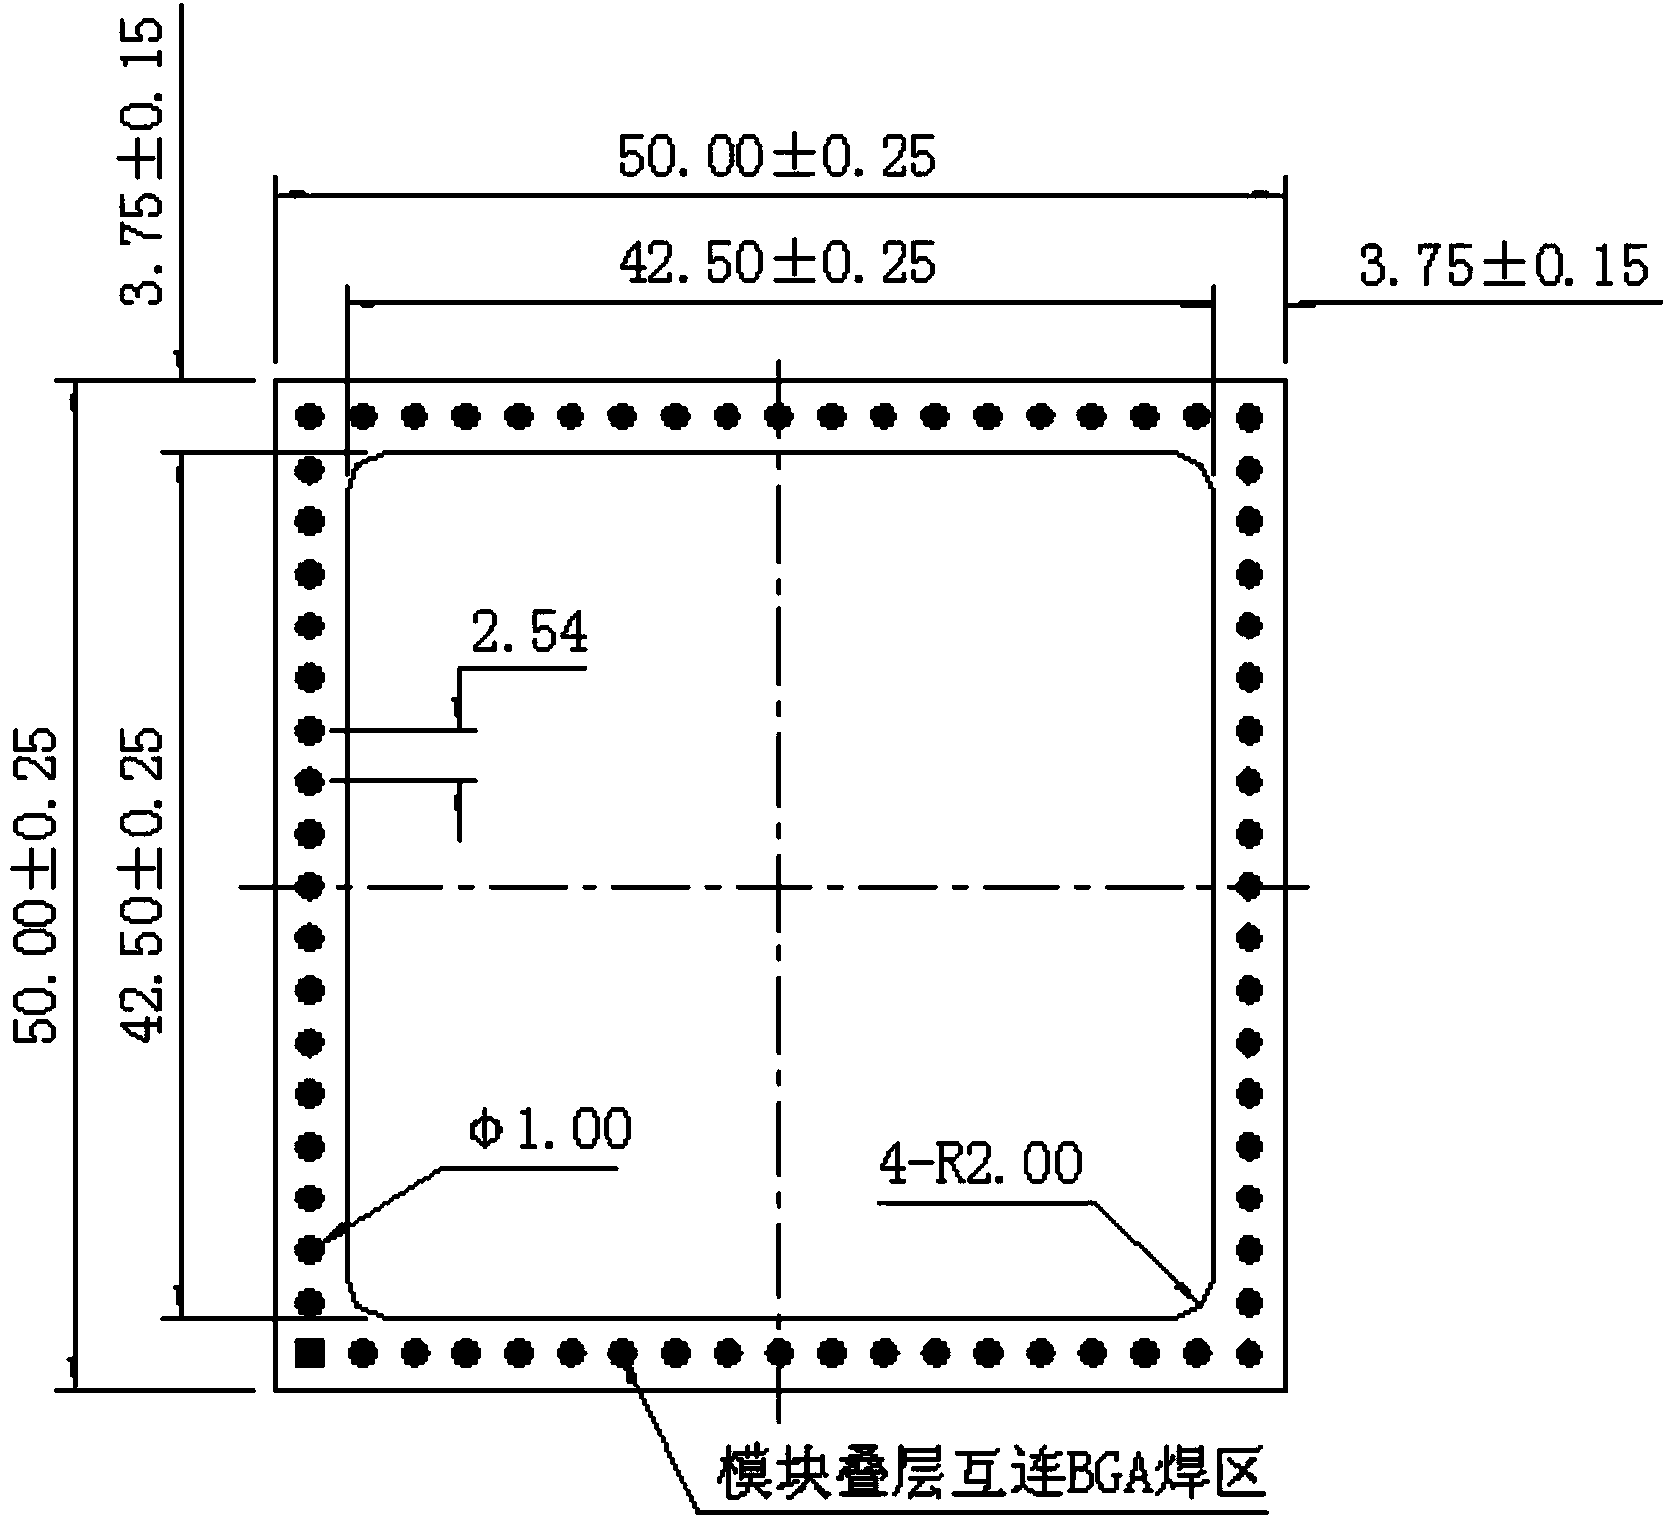 Ultra-multi-layer ultra-deep-cavity LTCC substrate manufacturing technology